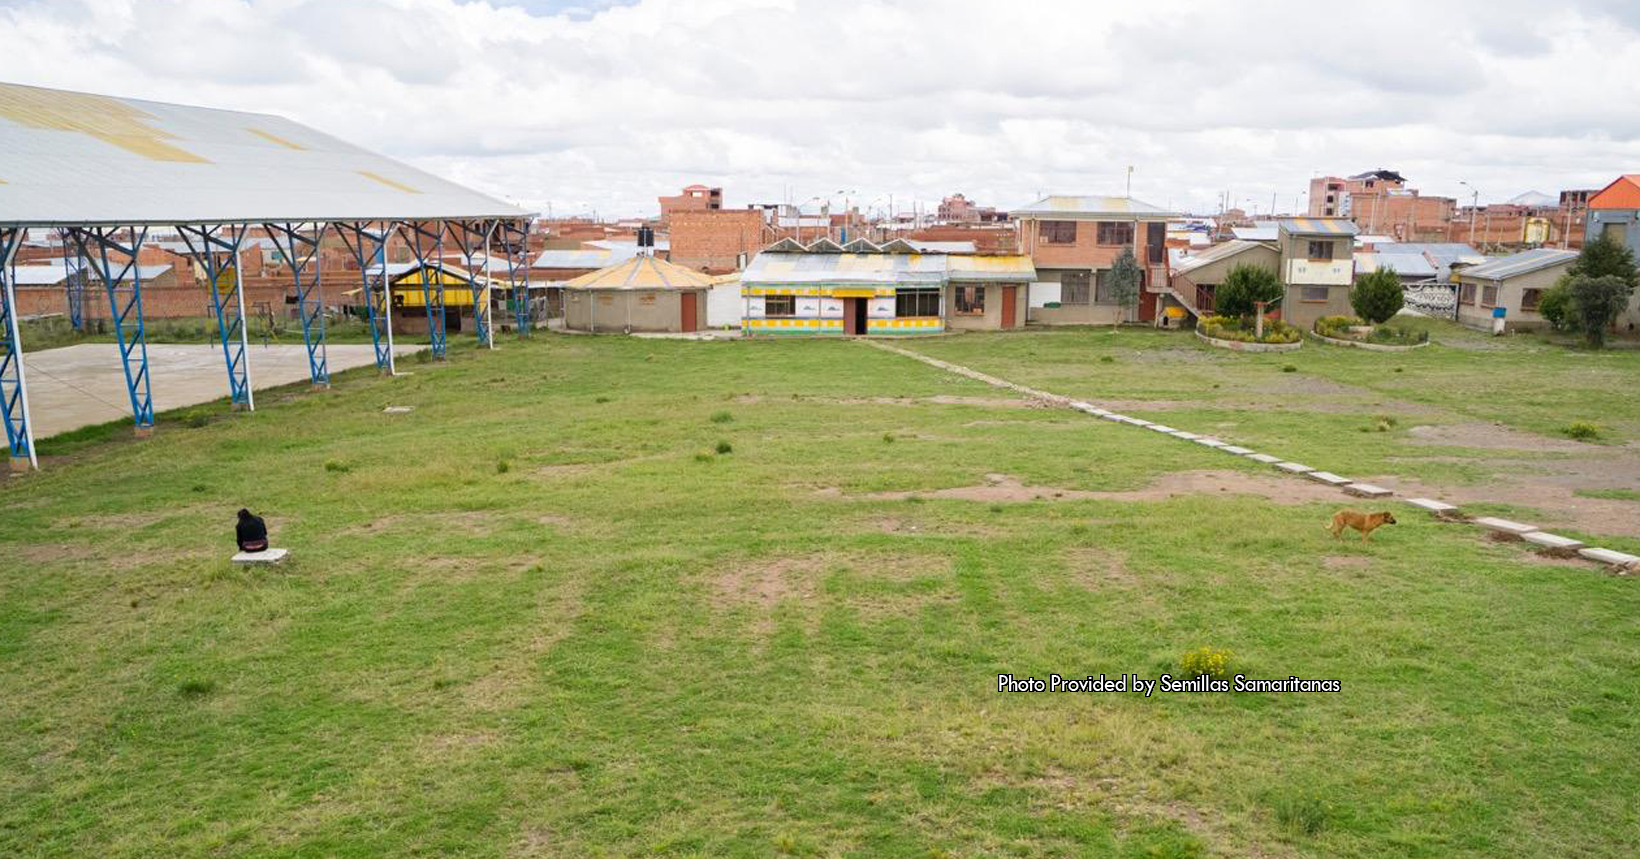 This particular photo was taken outside of the Semillas Samaritanas project. Given to the Father�s Table Foundation, this photo showcases a portion of the futsal court. Futsal is a variant of soccer (or futbol) that is played on a hard court. In addition to being a sector of the futsal court, this area is also a sector of the laundry, bathrooms, bedrooms, study room, television room and computer room. Not to mention, this is also a sector for the housing of all the volunteers. The young kids that come to the Semillas Samartianas project are provided with tools that will ensure their future will be a success. In addition, they are provided a safe place to live for their spiritual and even their psychological recovery. This area is the prime example that does this for the young kids here in the Semillas Samaritanas project. Although this area was and is for the benefit for the kids, they still have to maintain it and keep it clean. In the sector there is an open field of grass that connects multiple buildings together. The field of grass is bright green, but in some areas the grass is slowly dying. Furthermore, to the left of the photo is a concrete area that has a roof over it. The roof is mostly white, but some of the shingles are yellow in color. In the background of the photo there are multiple buildings that the Semillas Samaritanas project uses for various reasons. One of the buildings in the background has four parts of its wall in white. This building has a stone path that stretches from one of its doors all the way to the bottom right hand corner of the photo. Not to mention in the photo there is a person sitting down on a stone tablet and a dog that is standing next